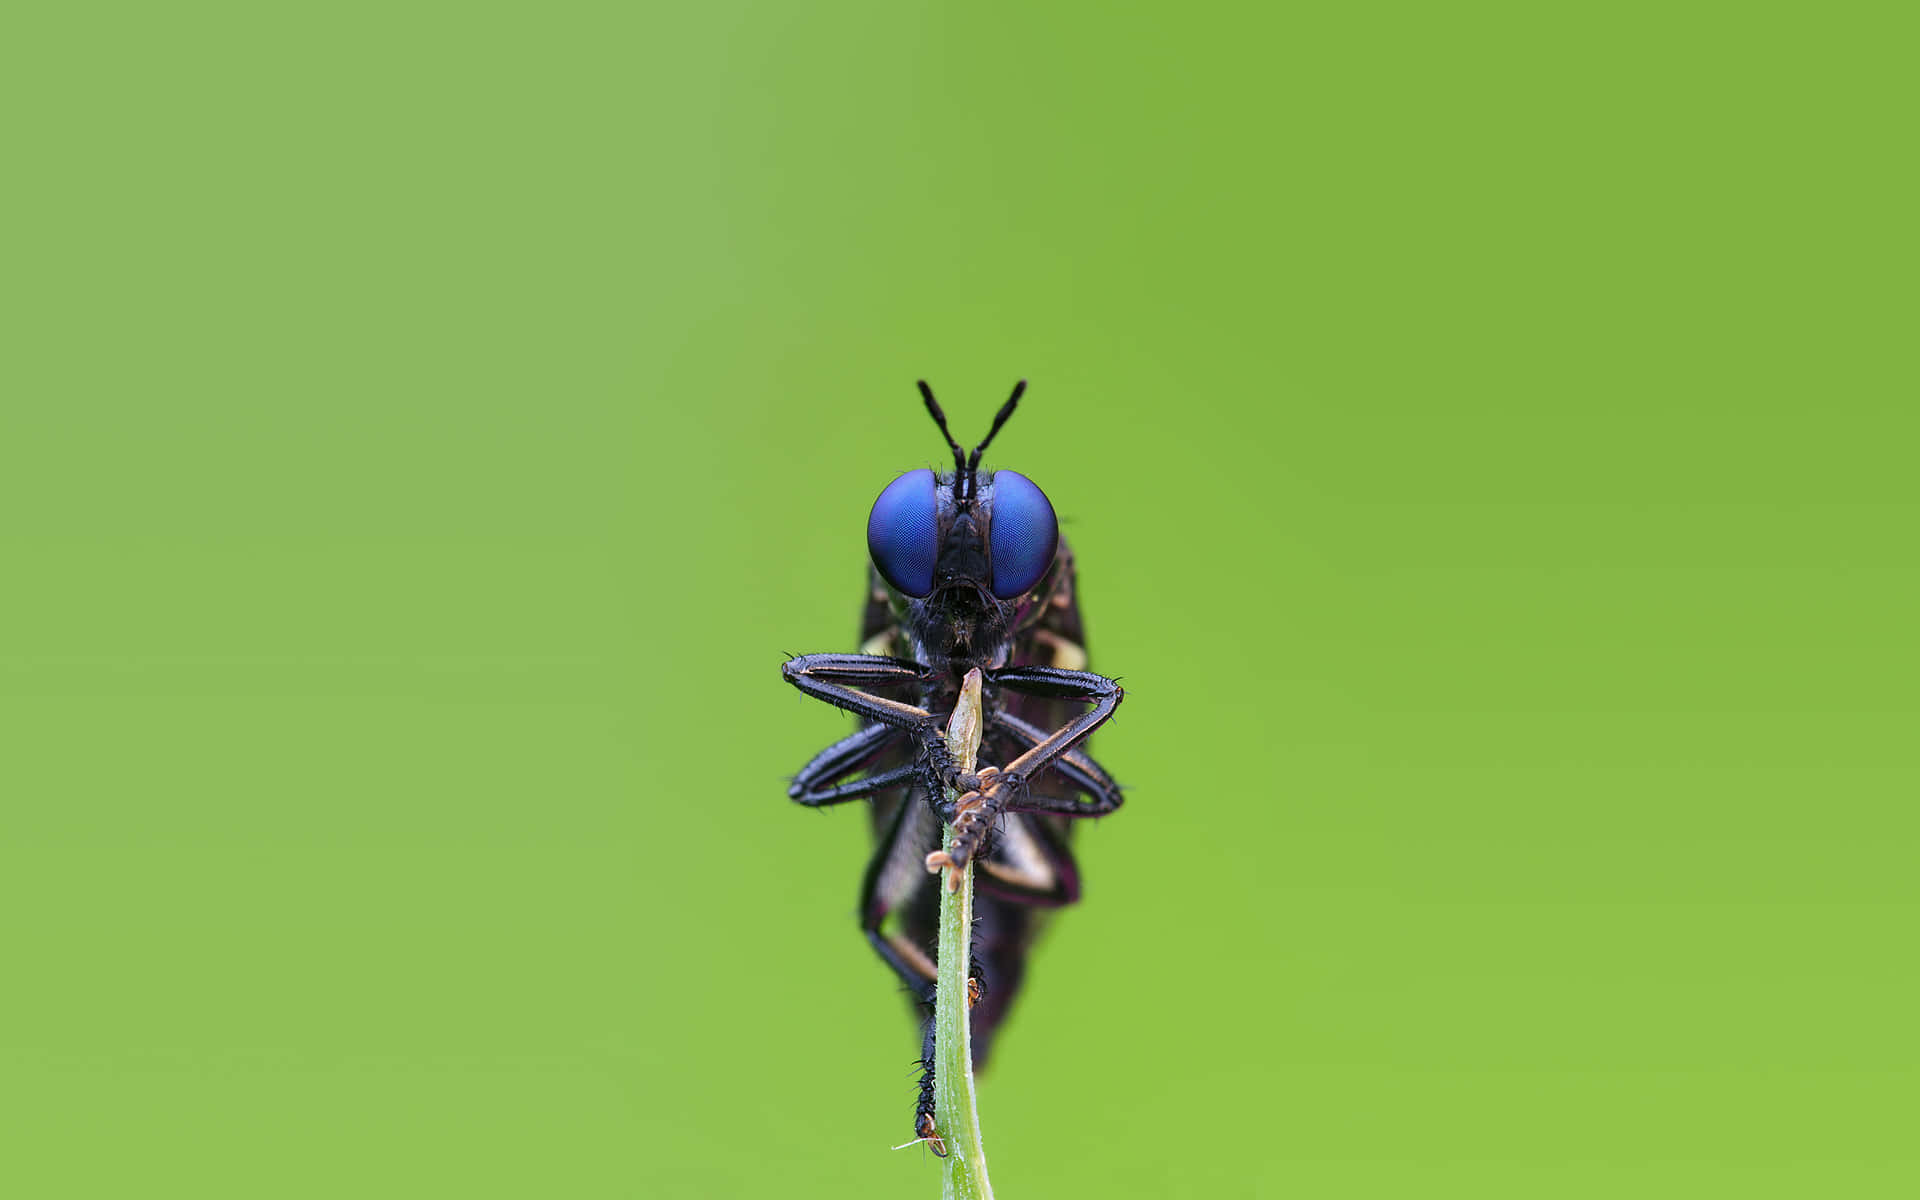 Dark Blue-Eyed Insects Wallpaper